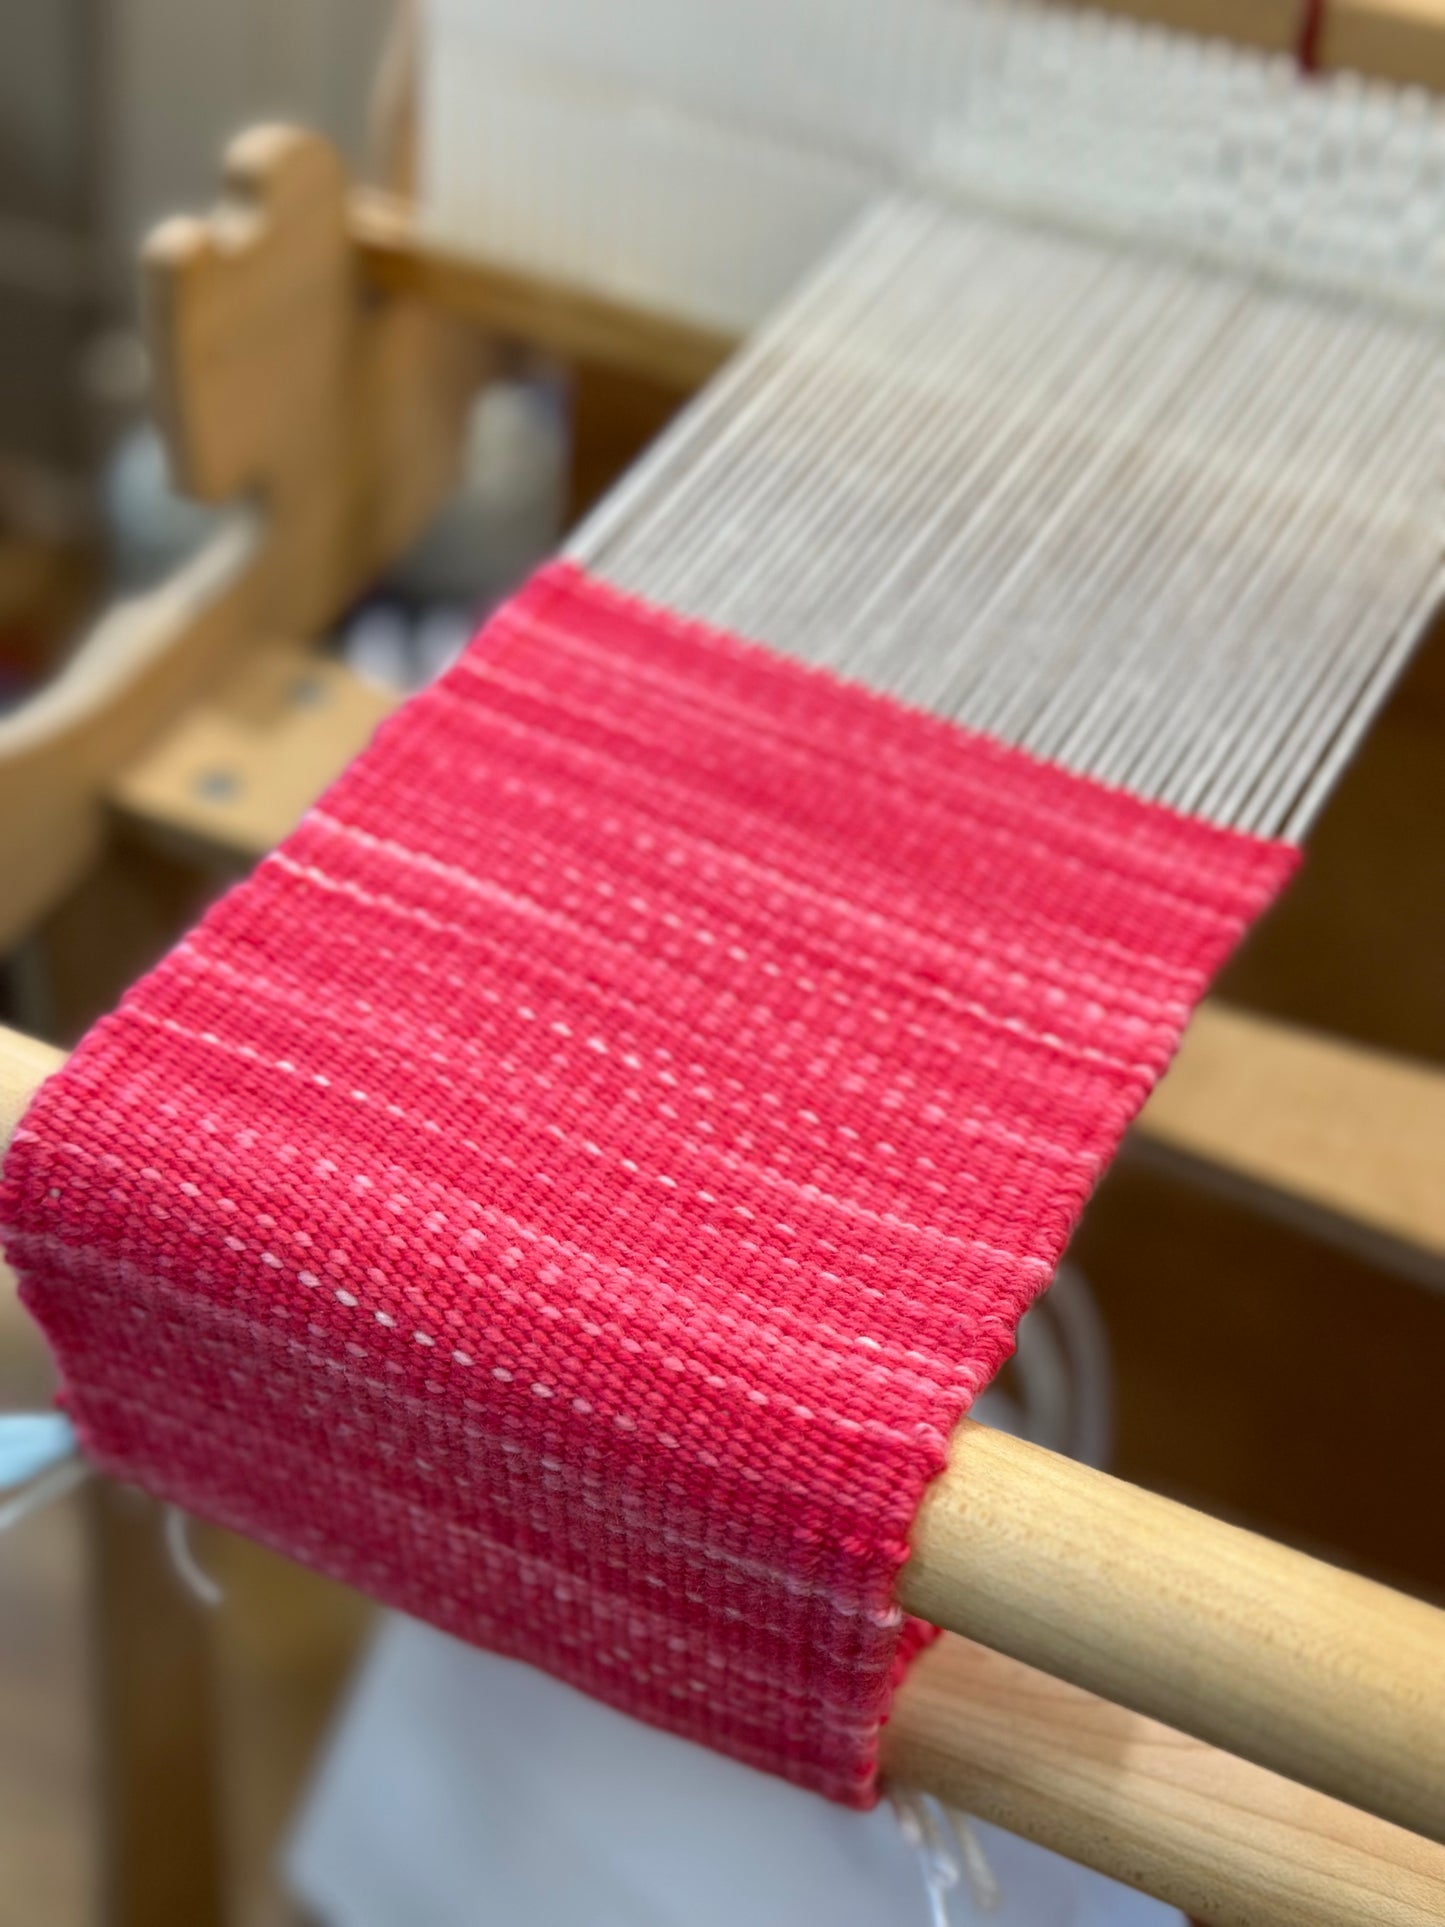 Learn to Weave - Group C